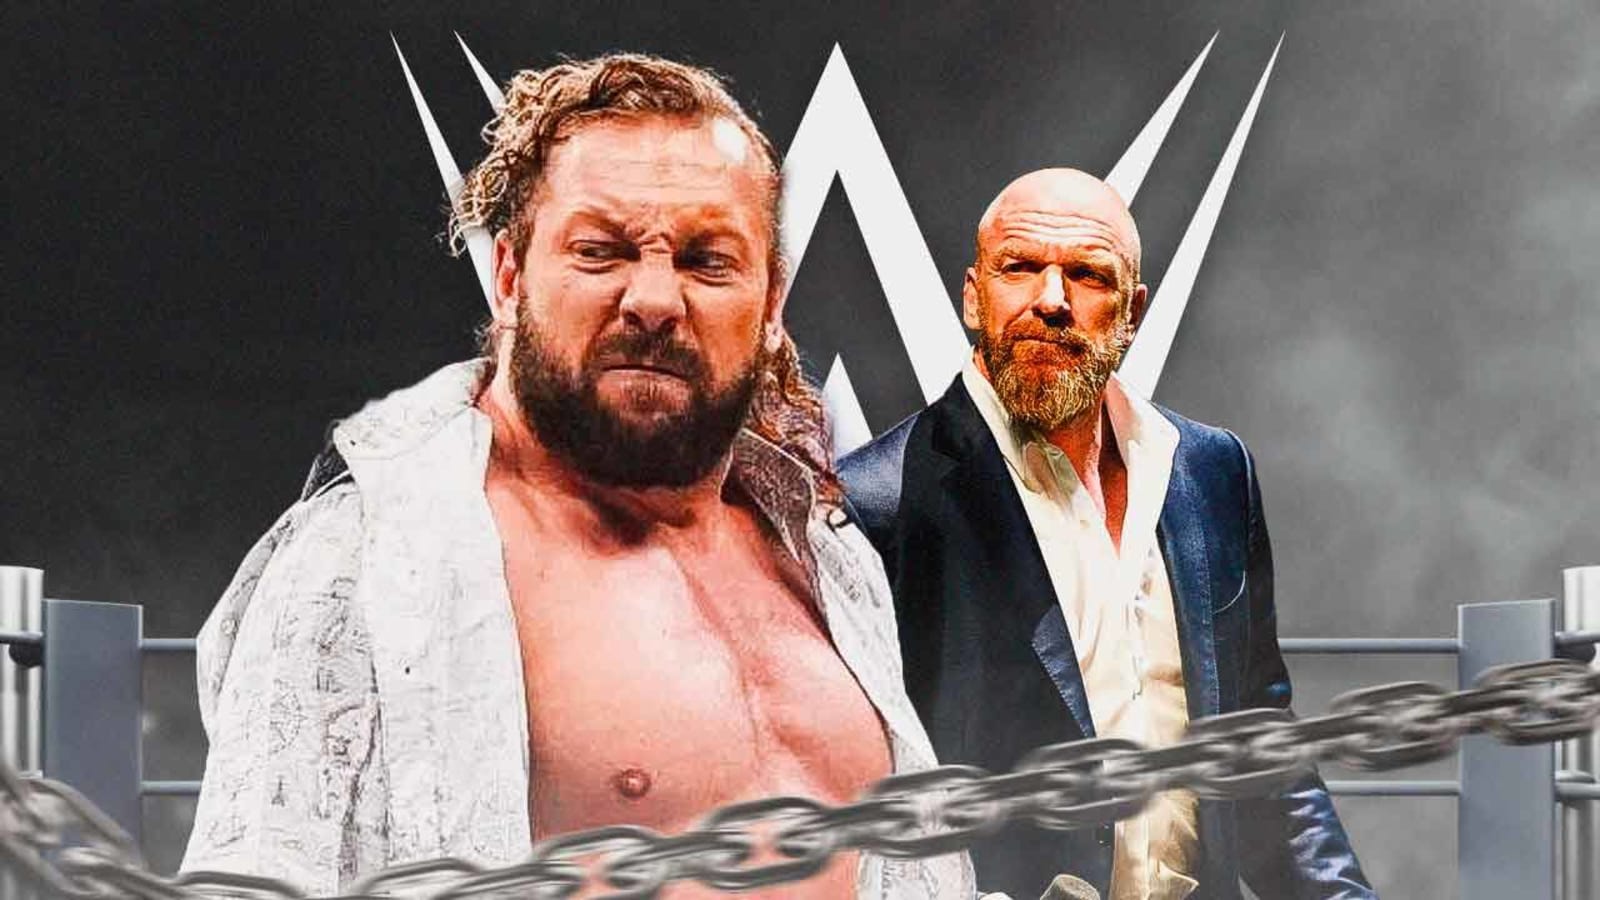 Kenny Omega gives his take on Triple H’s reign as WWE CCO